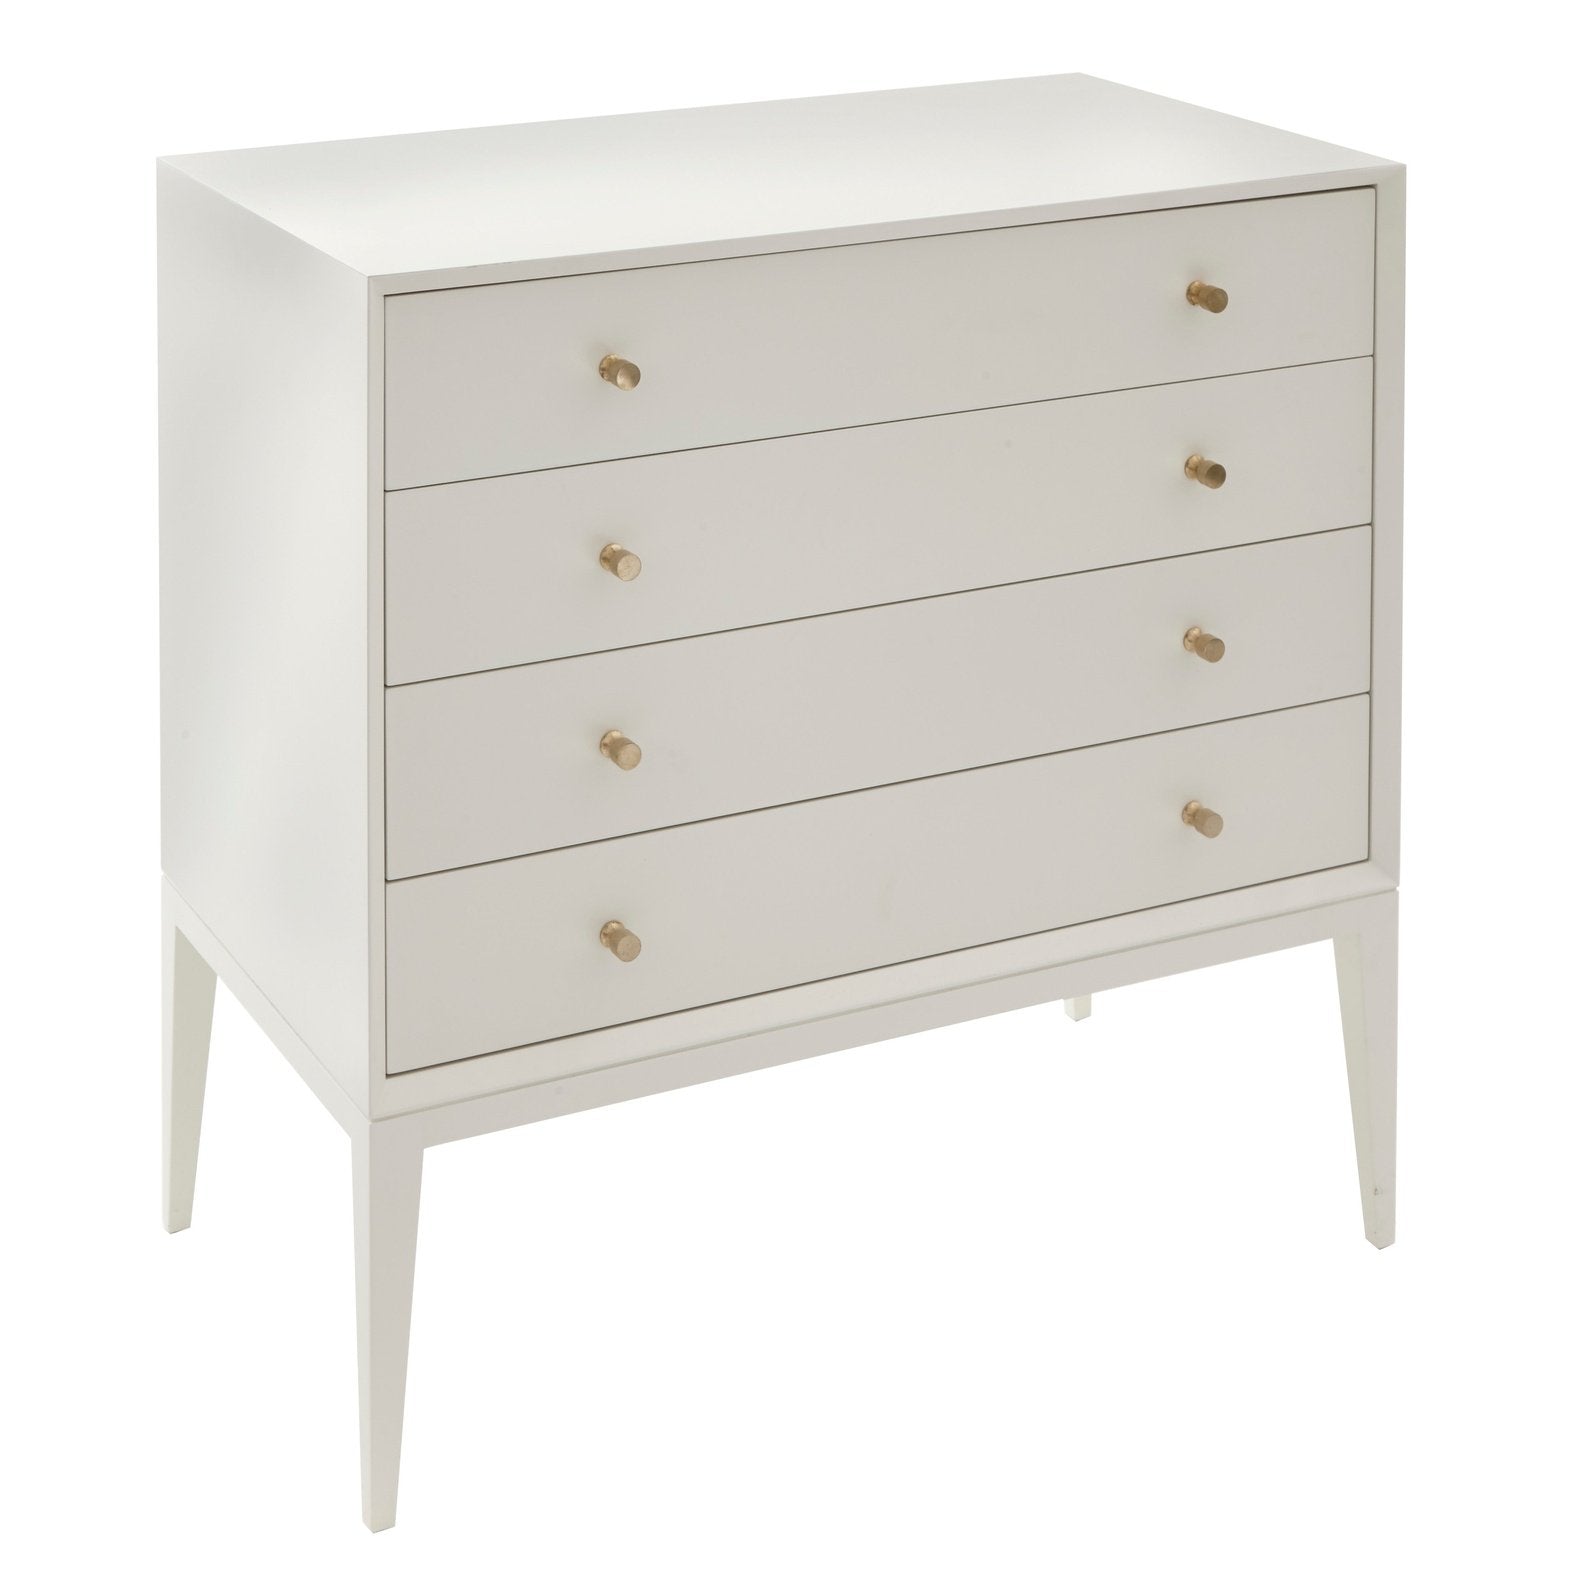 Celine chest of drawers white and brass